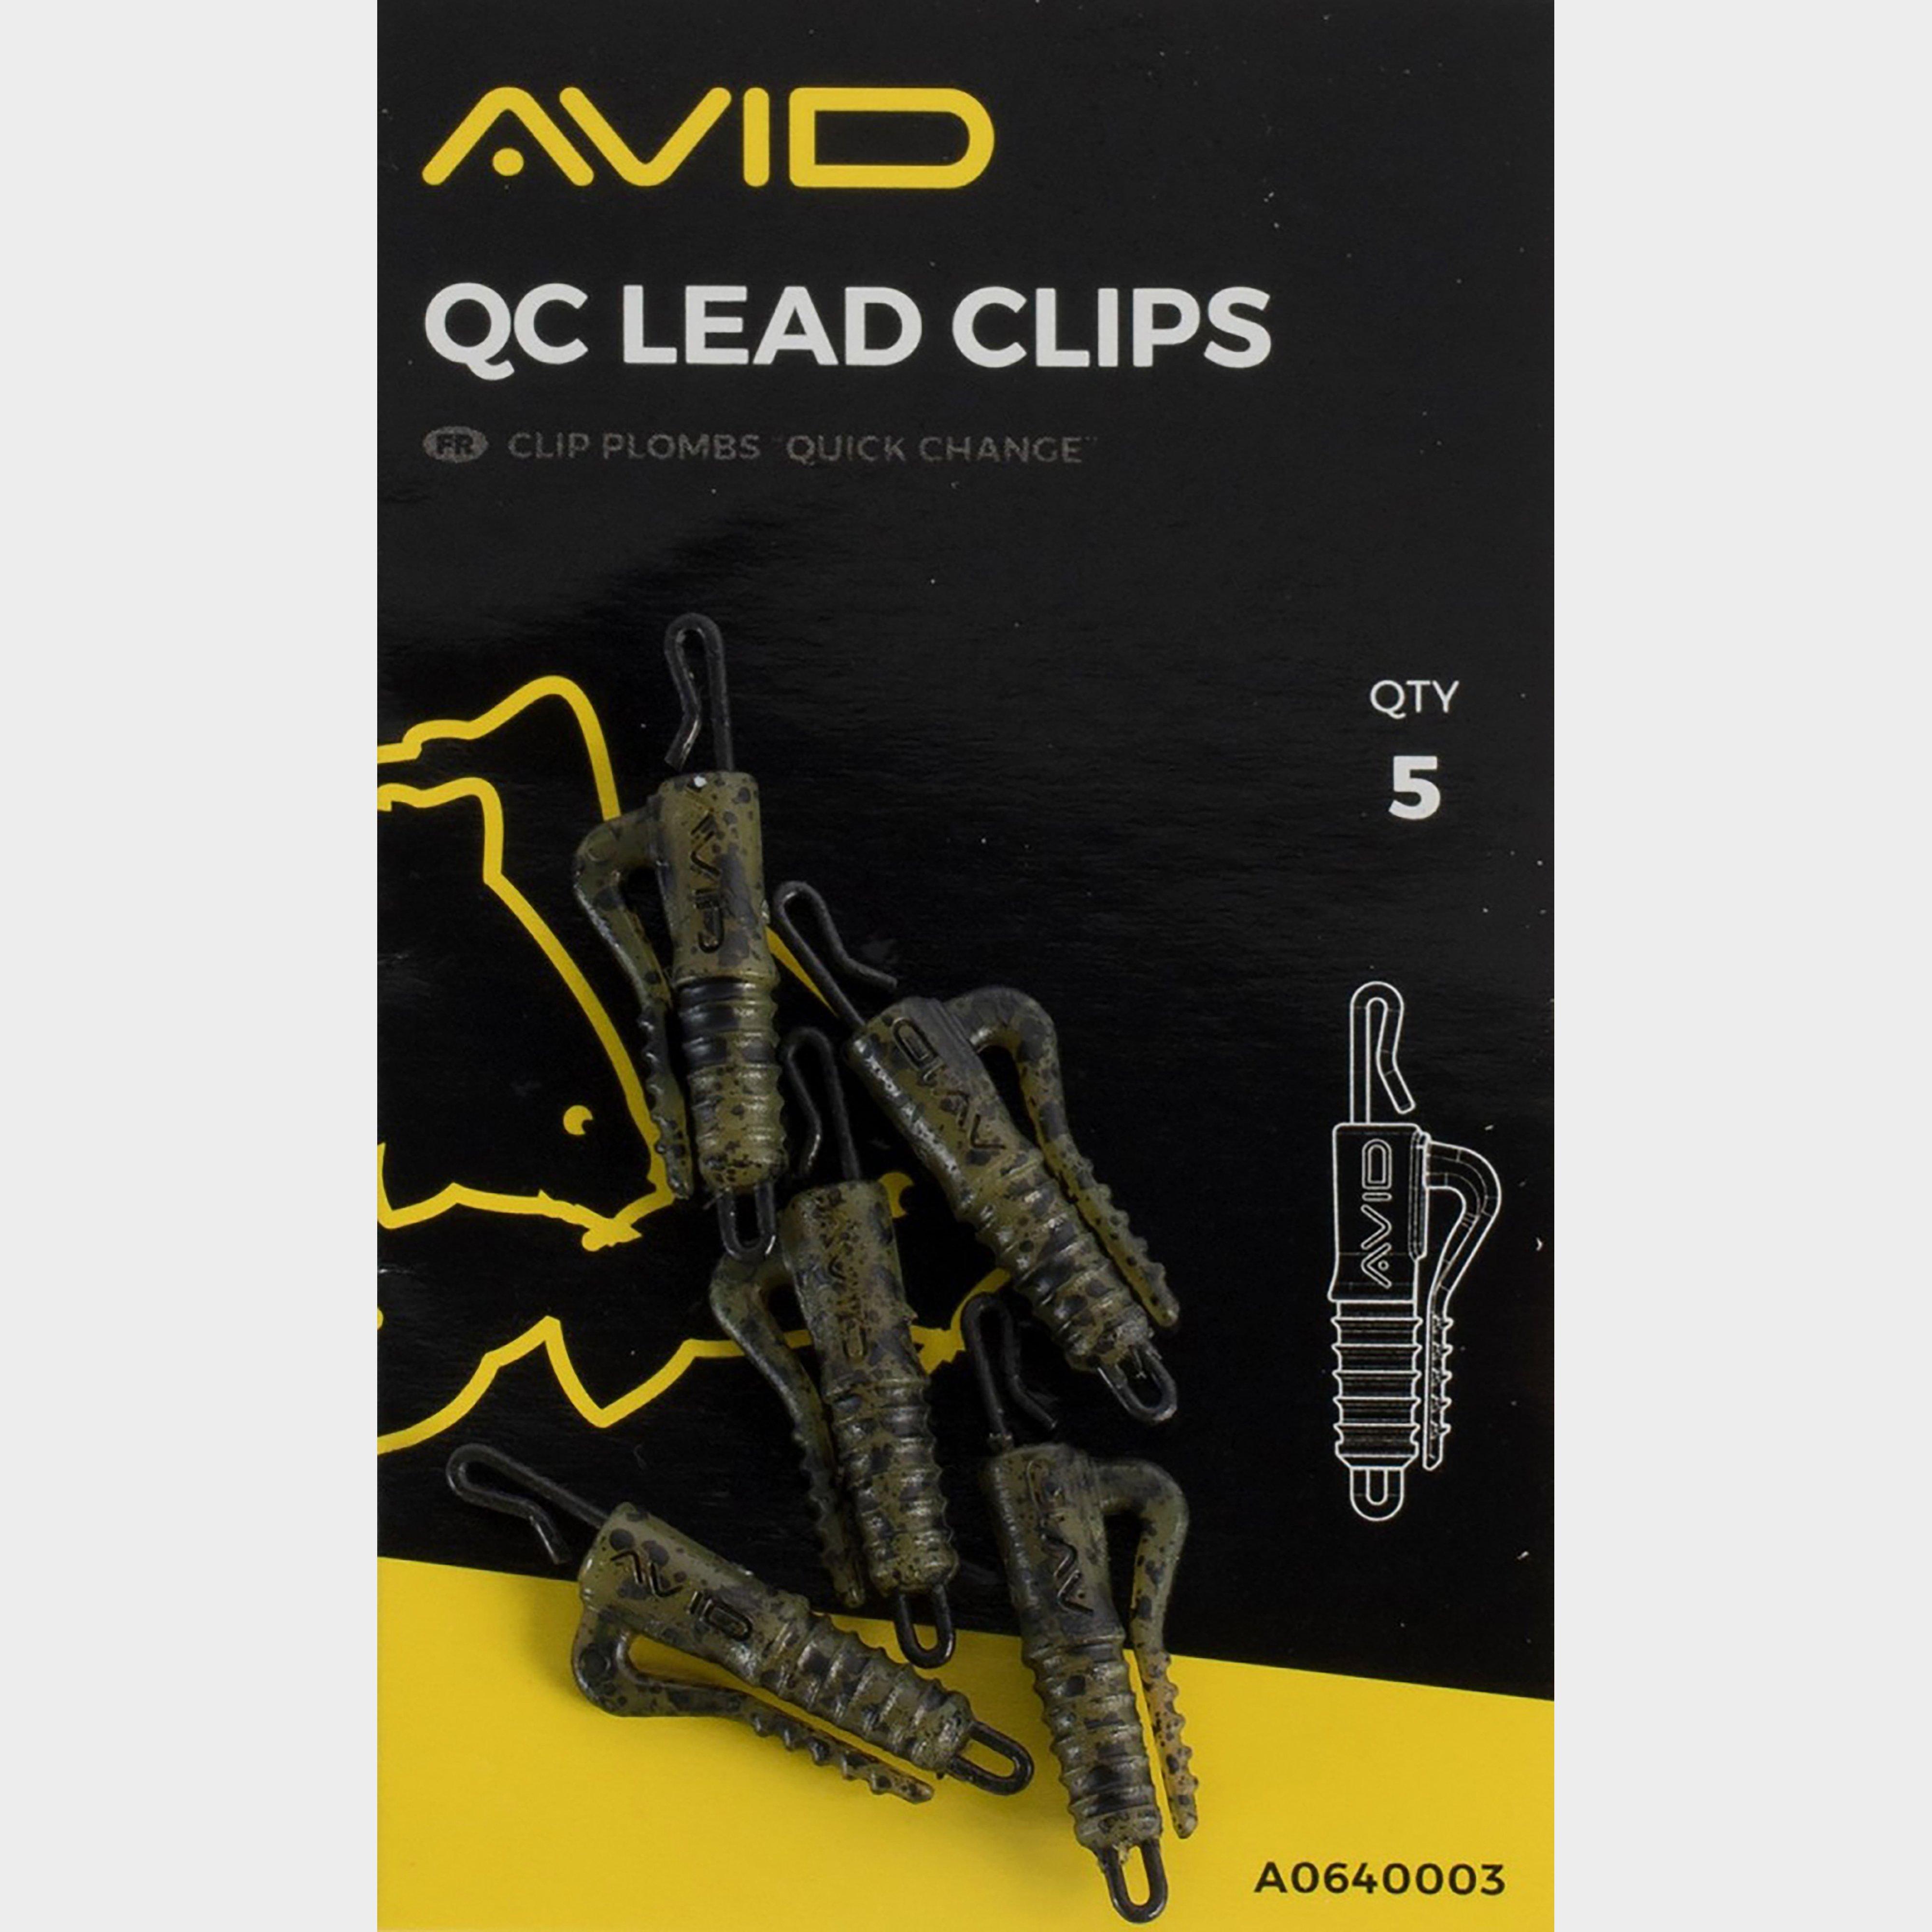 Photos - Other for Fishing Avid Qc Lead Clips, Green 